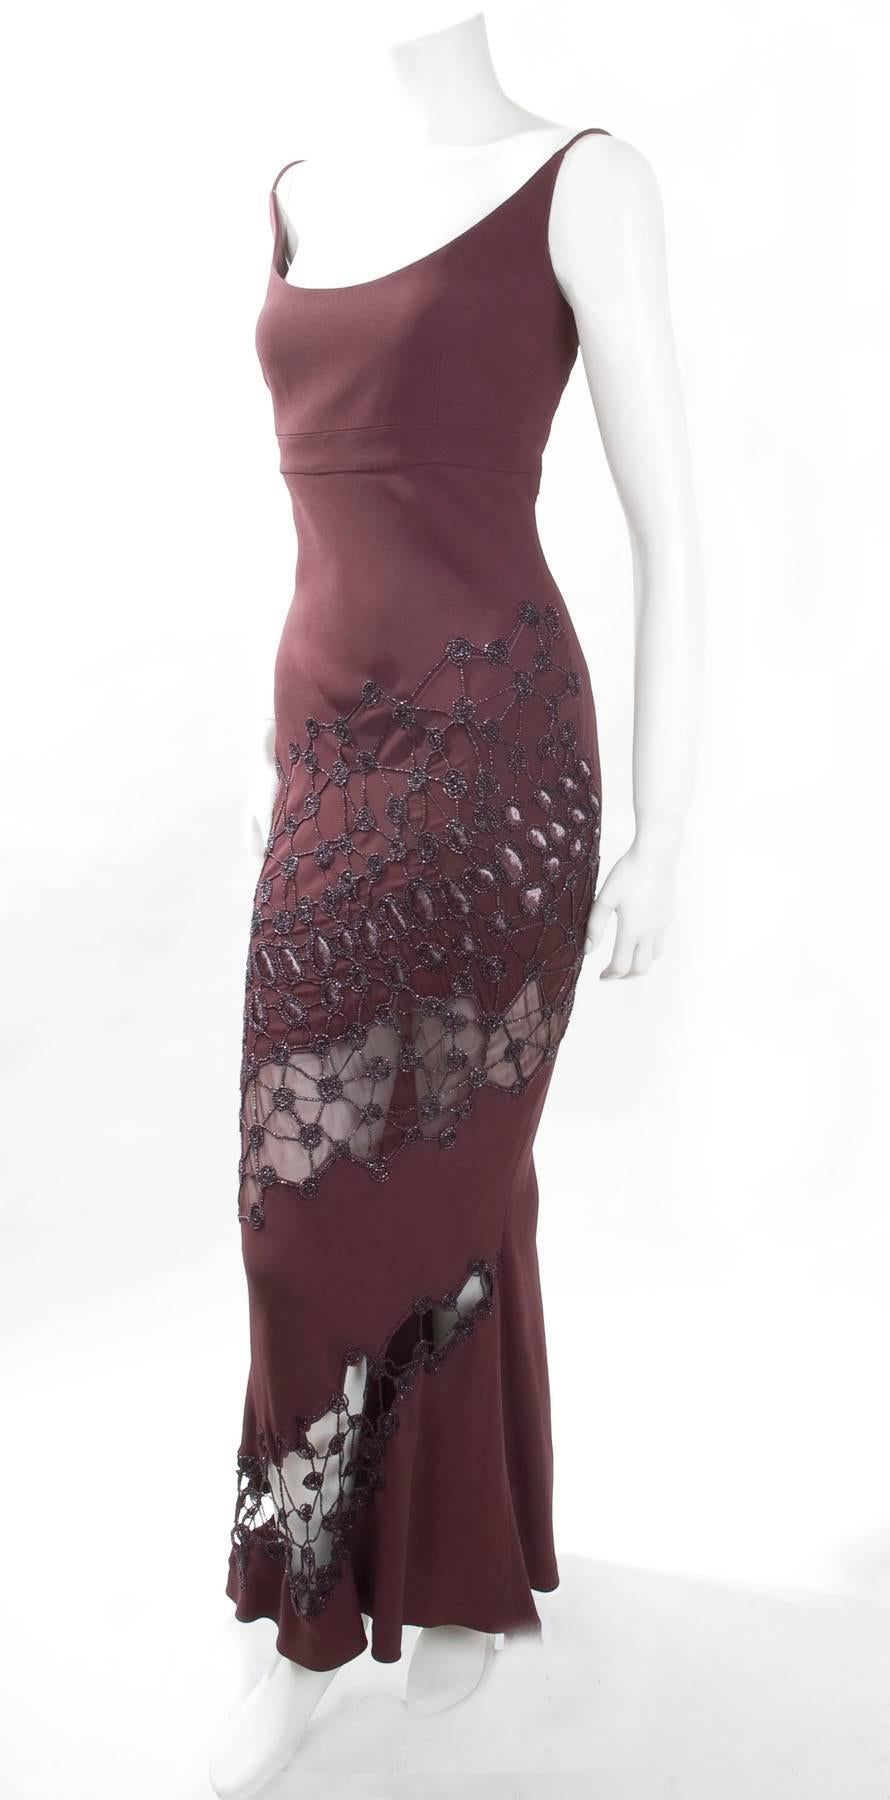 Vintage Angelo Mozzillo evening dress wonderful pattern embroidered with beads. Back closure with small buttons. The color is a deep burgundy red.
Fabric is acetate and viscose.
Excellent condition - worn once.
Size 42 IT - circa 6